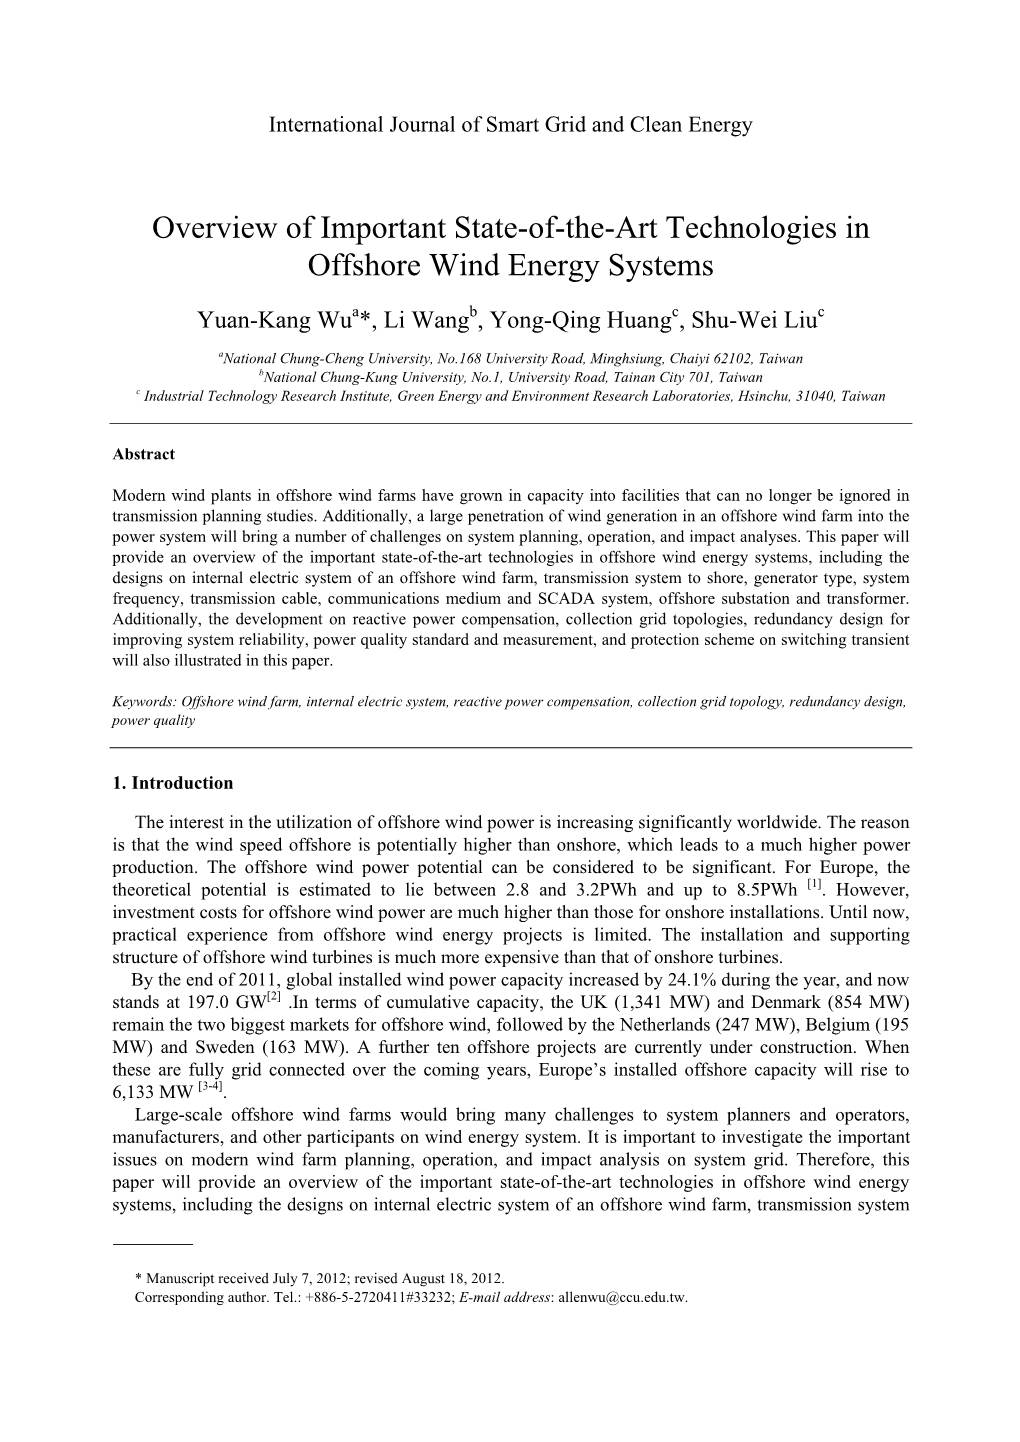 Overview of Important State-Of-The-Art Technologies in Offshore Wind Energy Systems